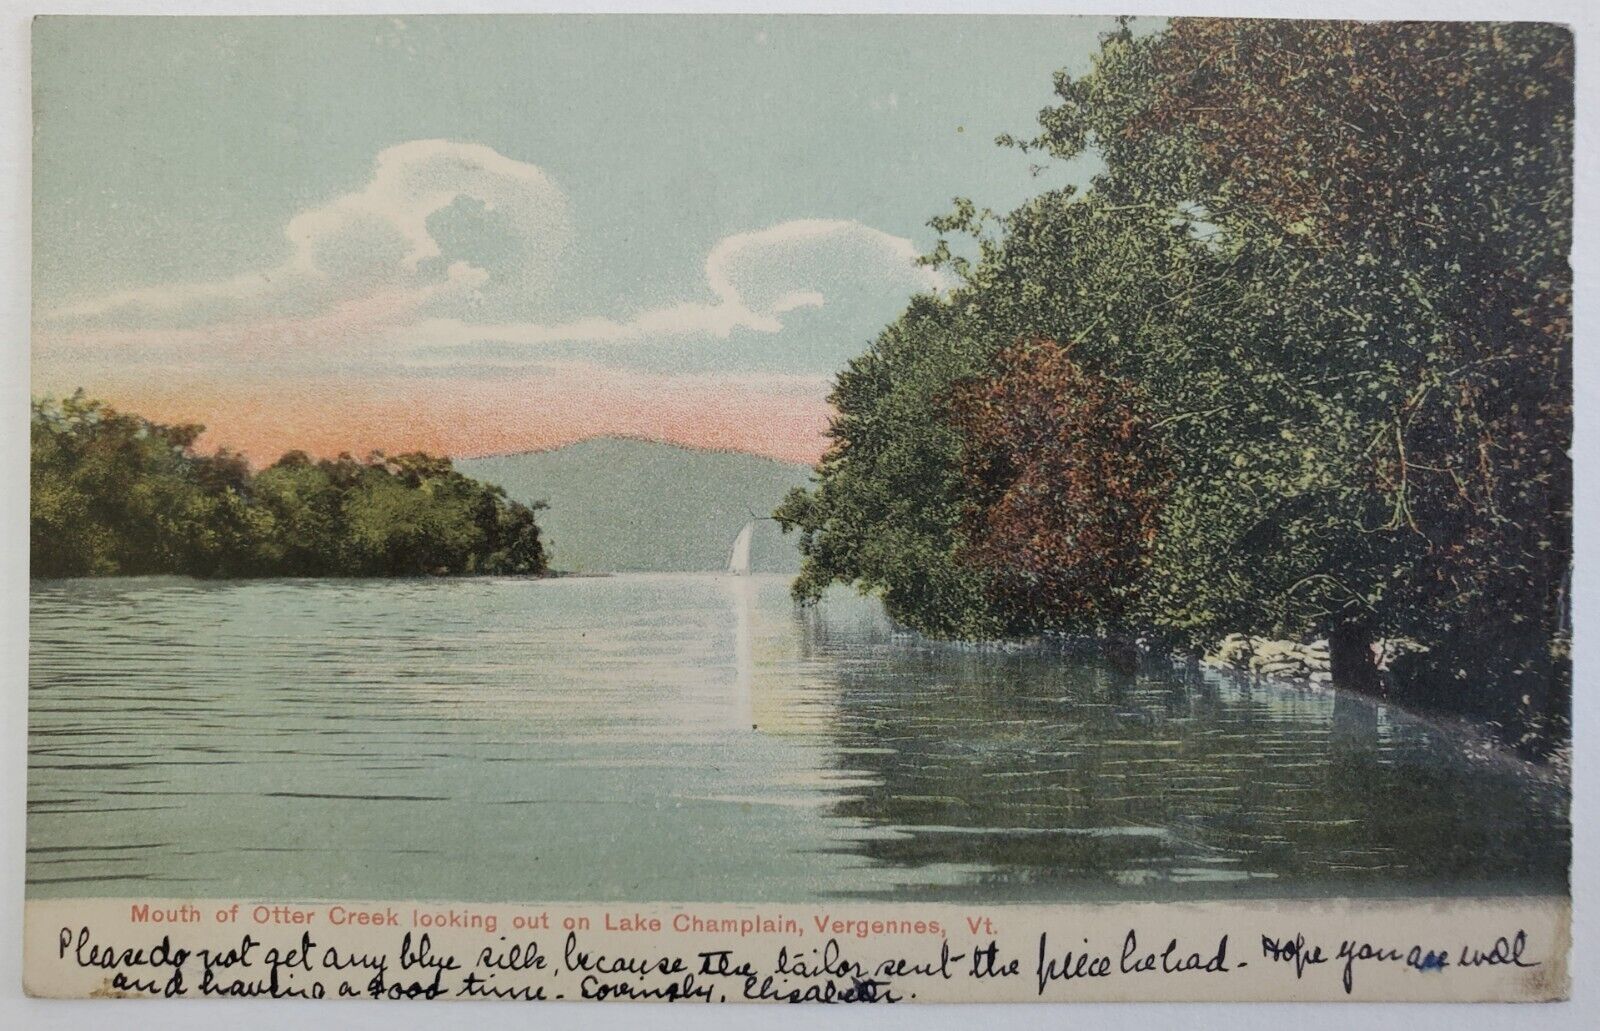 Vergennes, VT Mouth of Otter Creek to Lake Champlain 1908 Antique Postcard b26